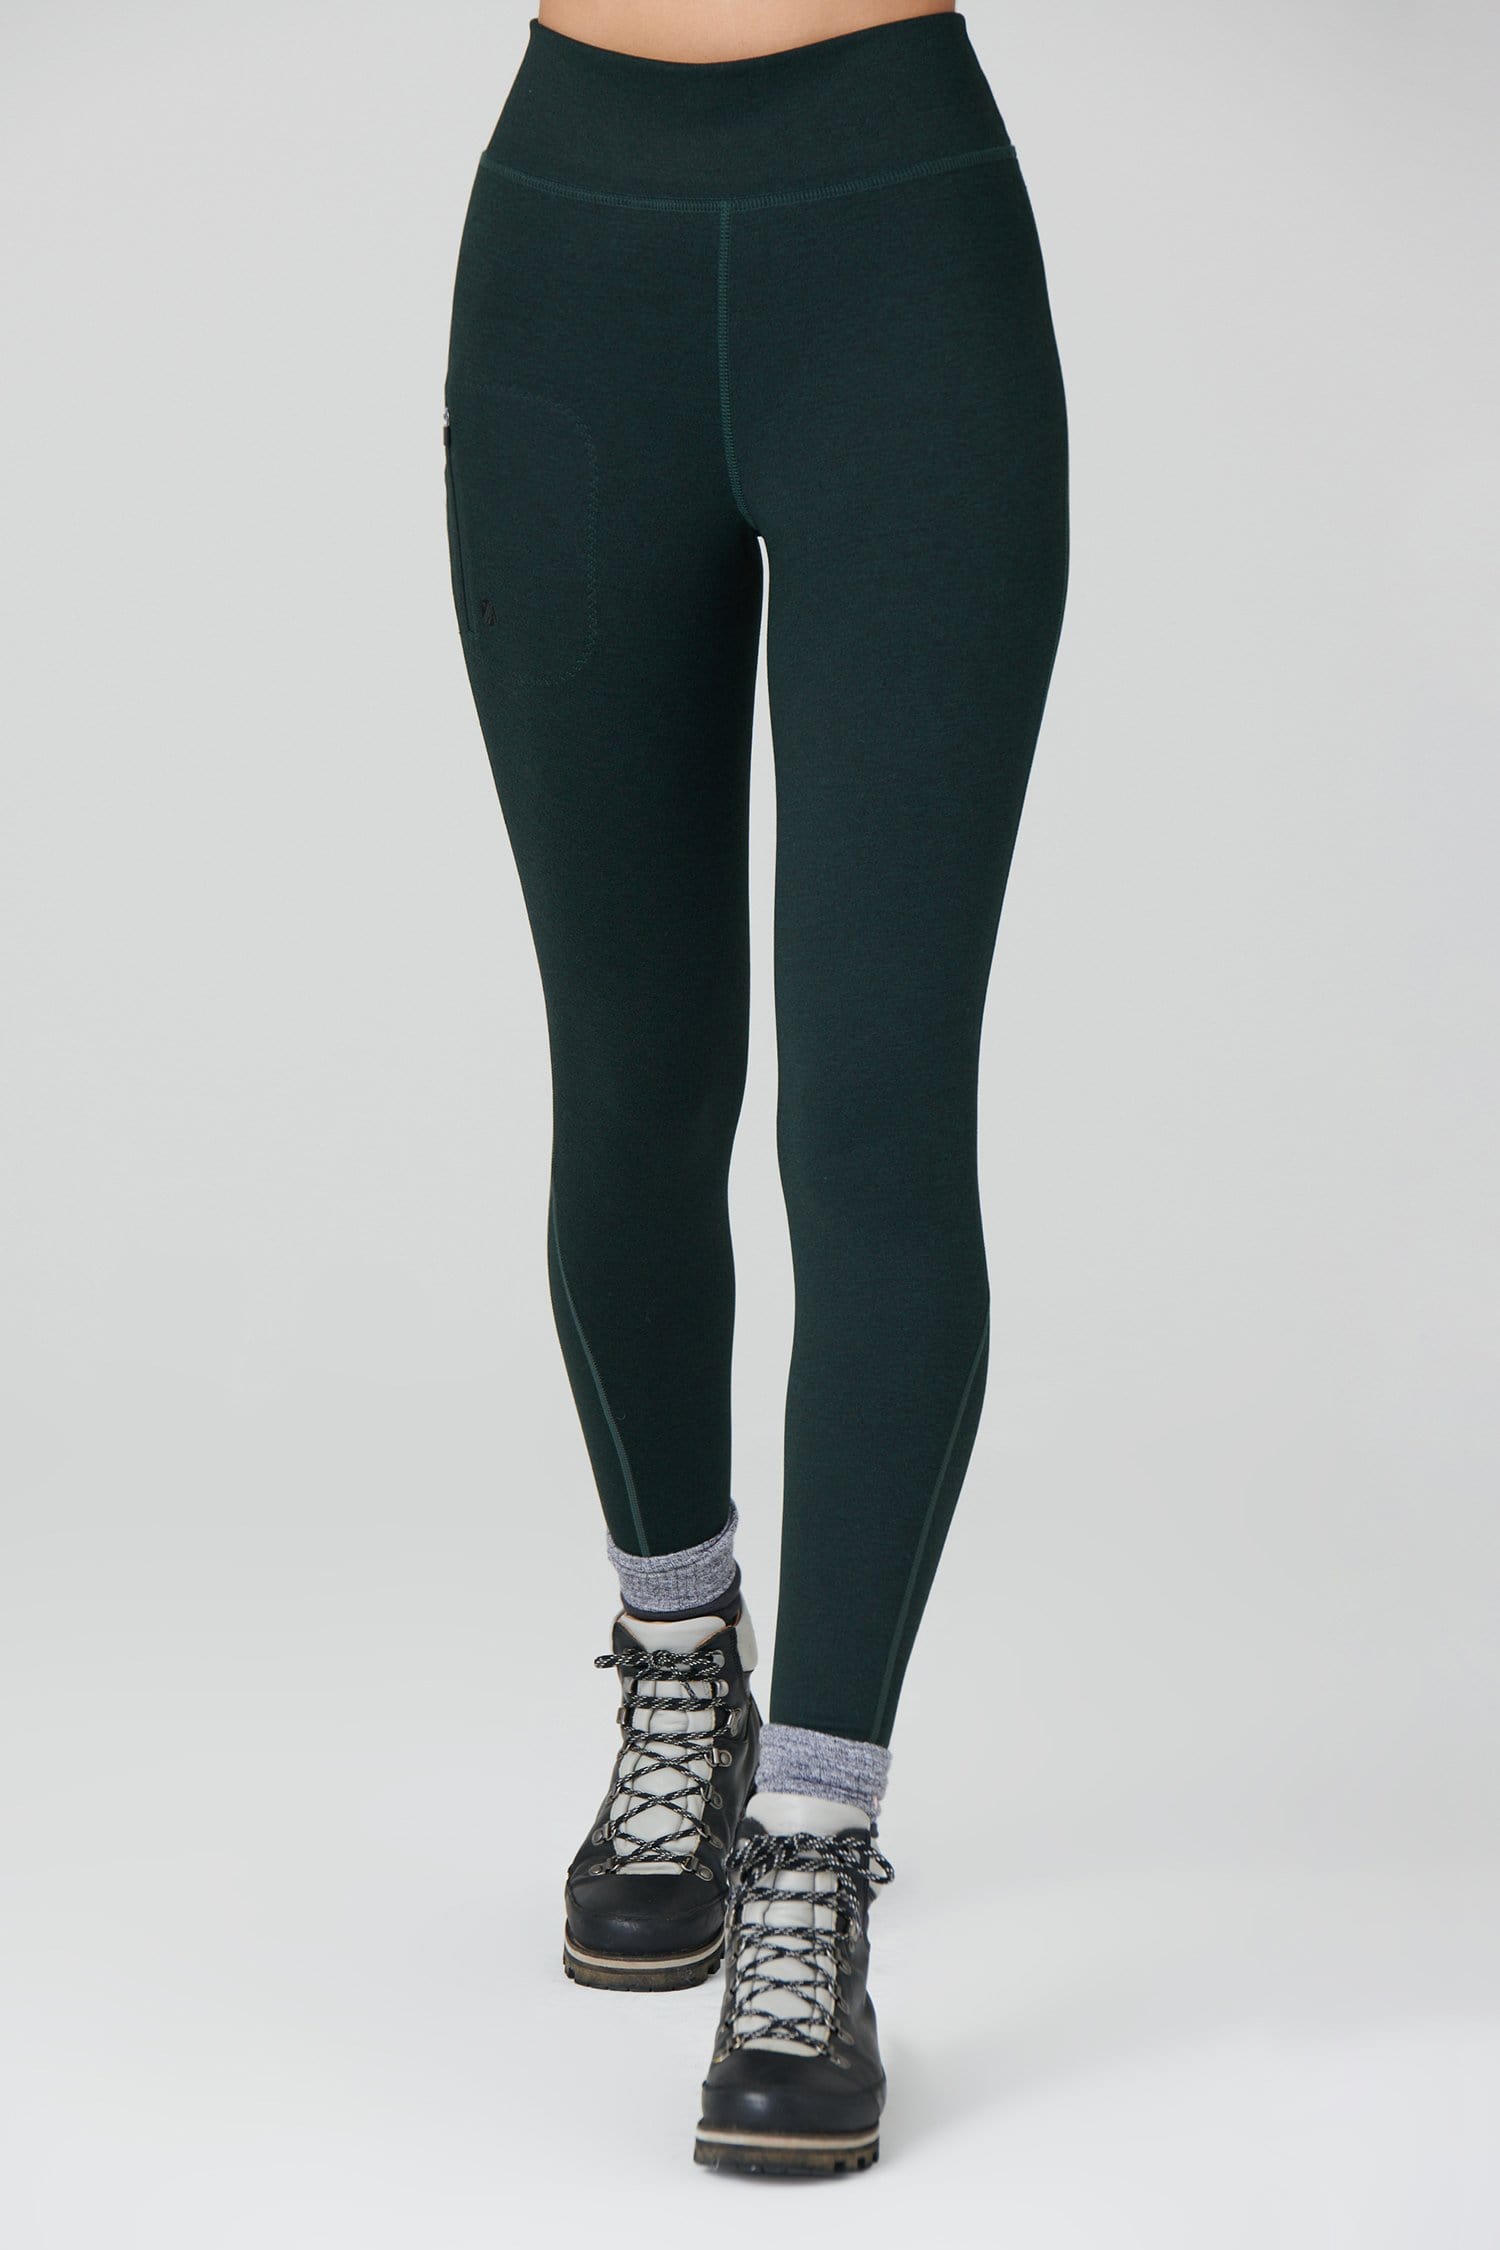 Thermal Outdoor Leggings - Forest Green - Xlarge / Uk16 - Womens - Acai Outdoorwear